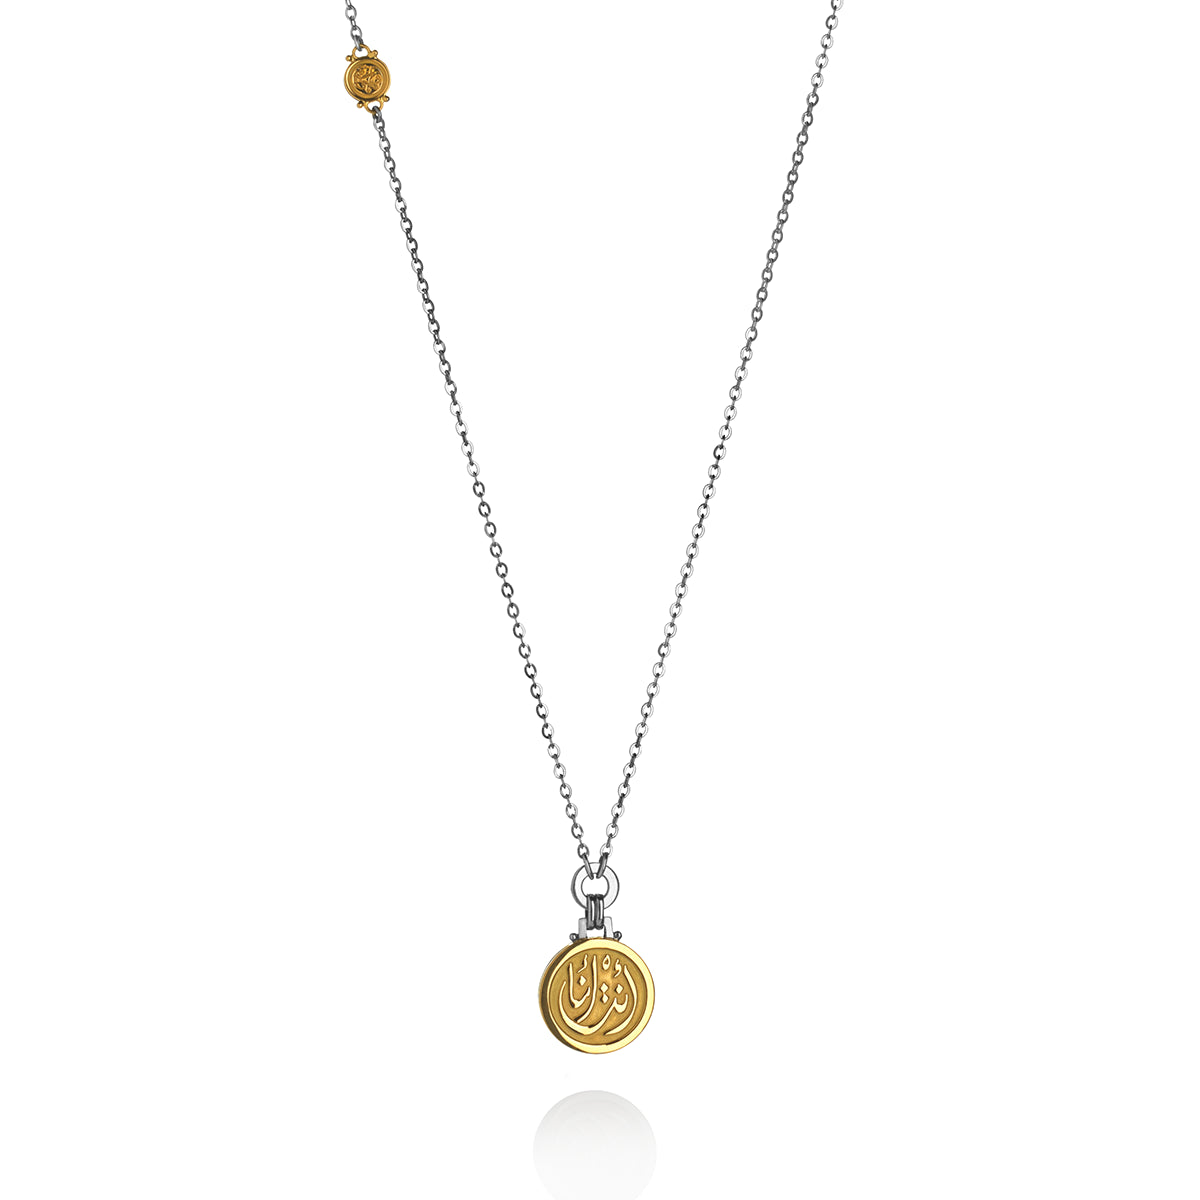 Dainty Calligraphy Necklace for her by Azza Fahmy - Designer Necklaces